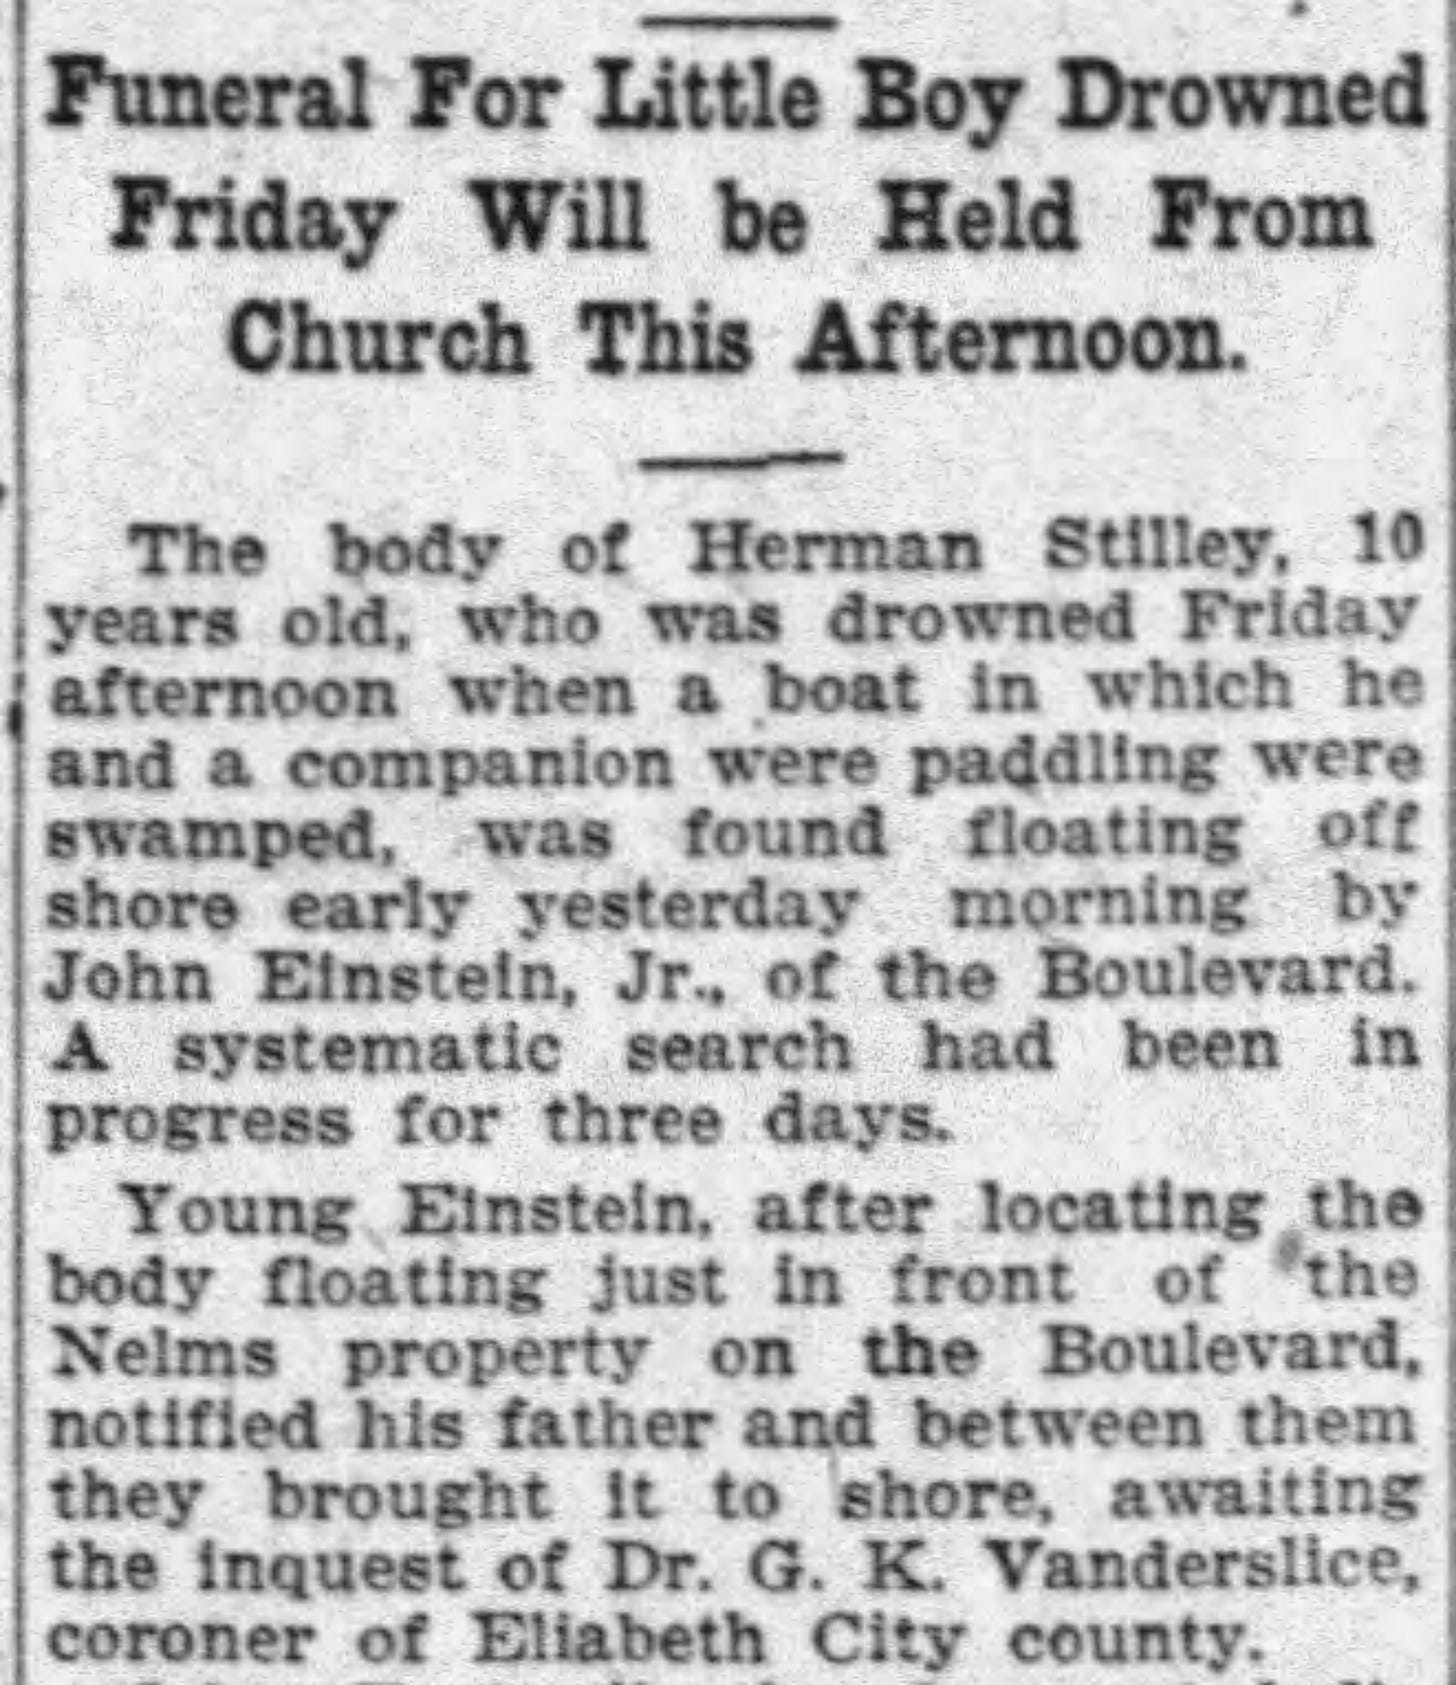 Newspaper clipping about a funeral for a little boy who drowned. 